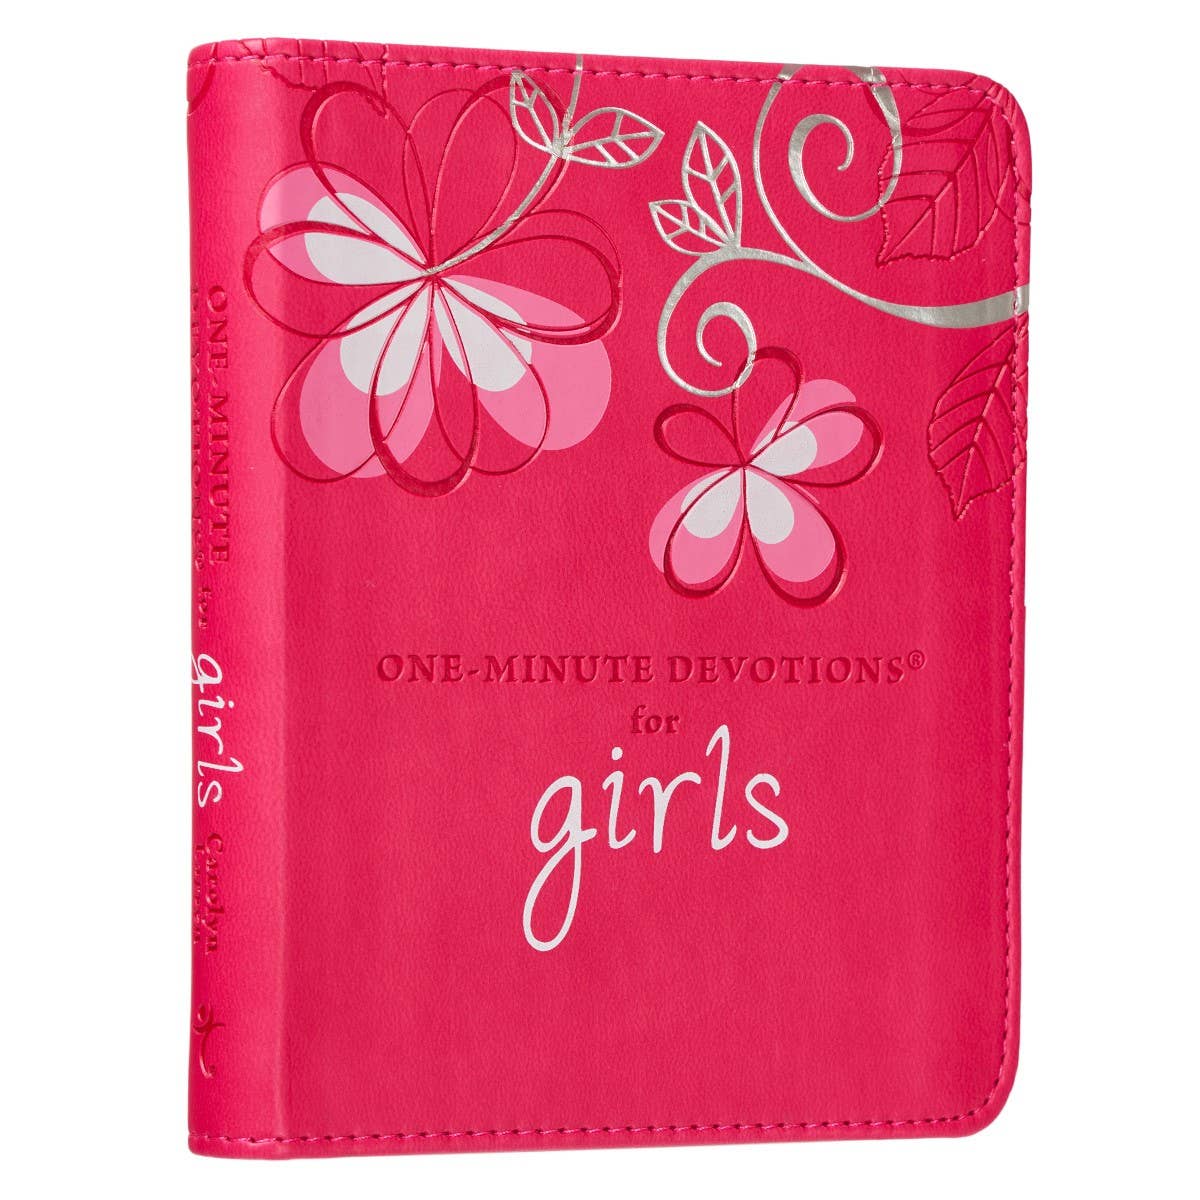 The One-Minute Devotions for Girls Devotional